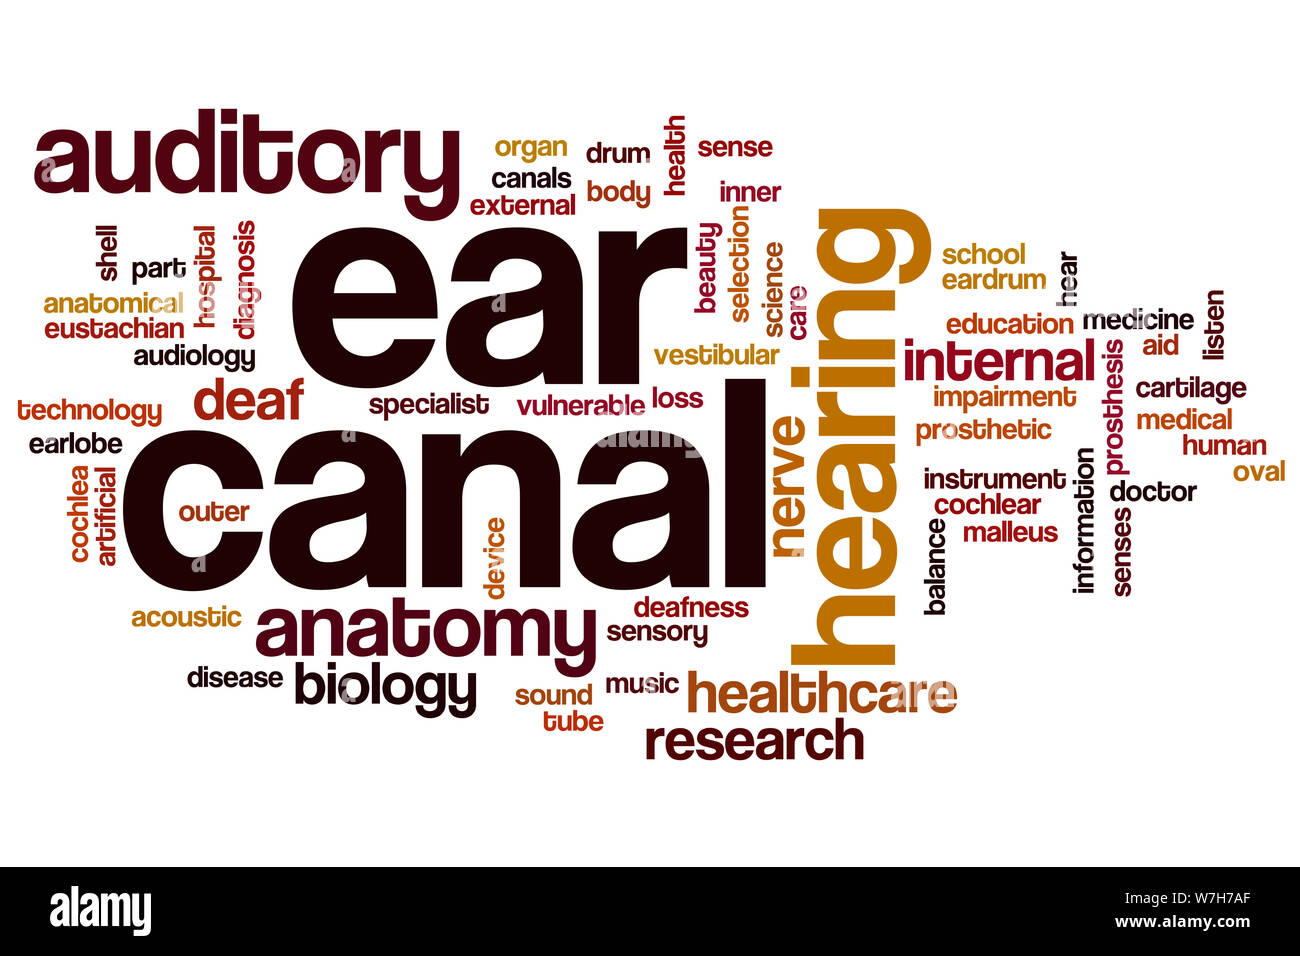 Ear canal word cloud concept Stock Photo